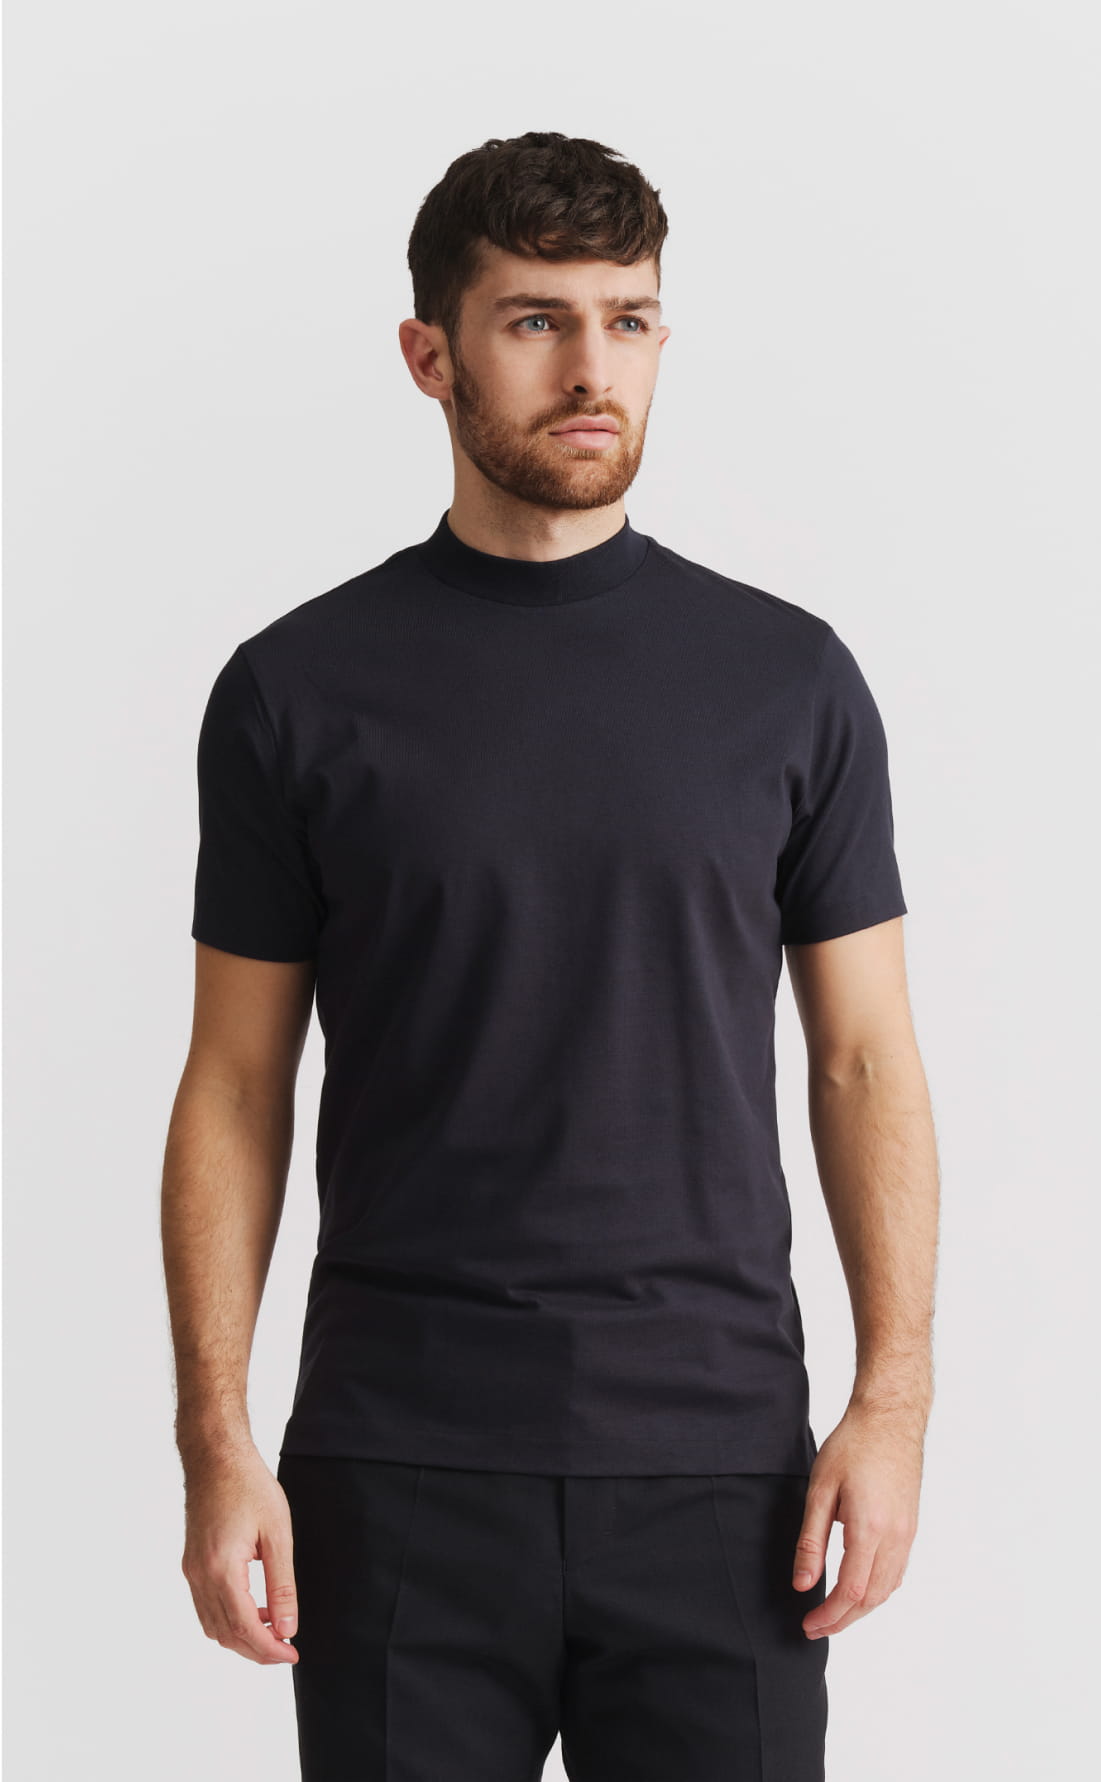 Custom Fitted Hi-Neck T-Shirt | of a Tailor